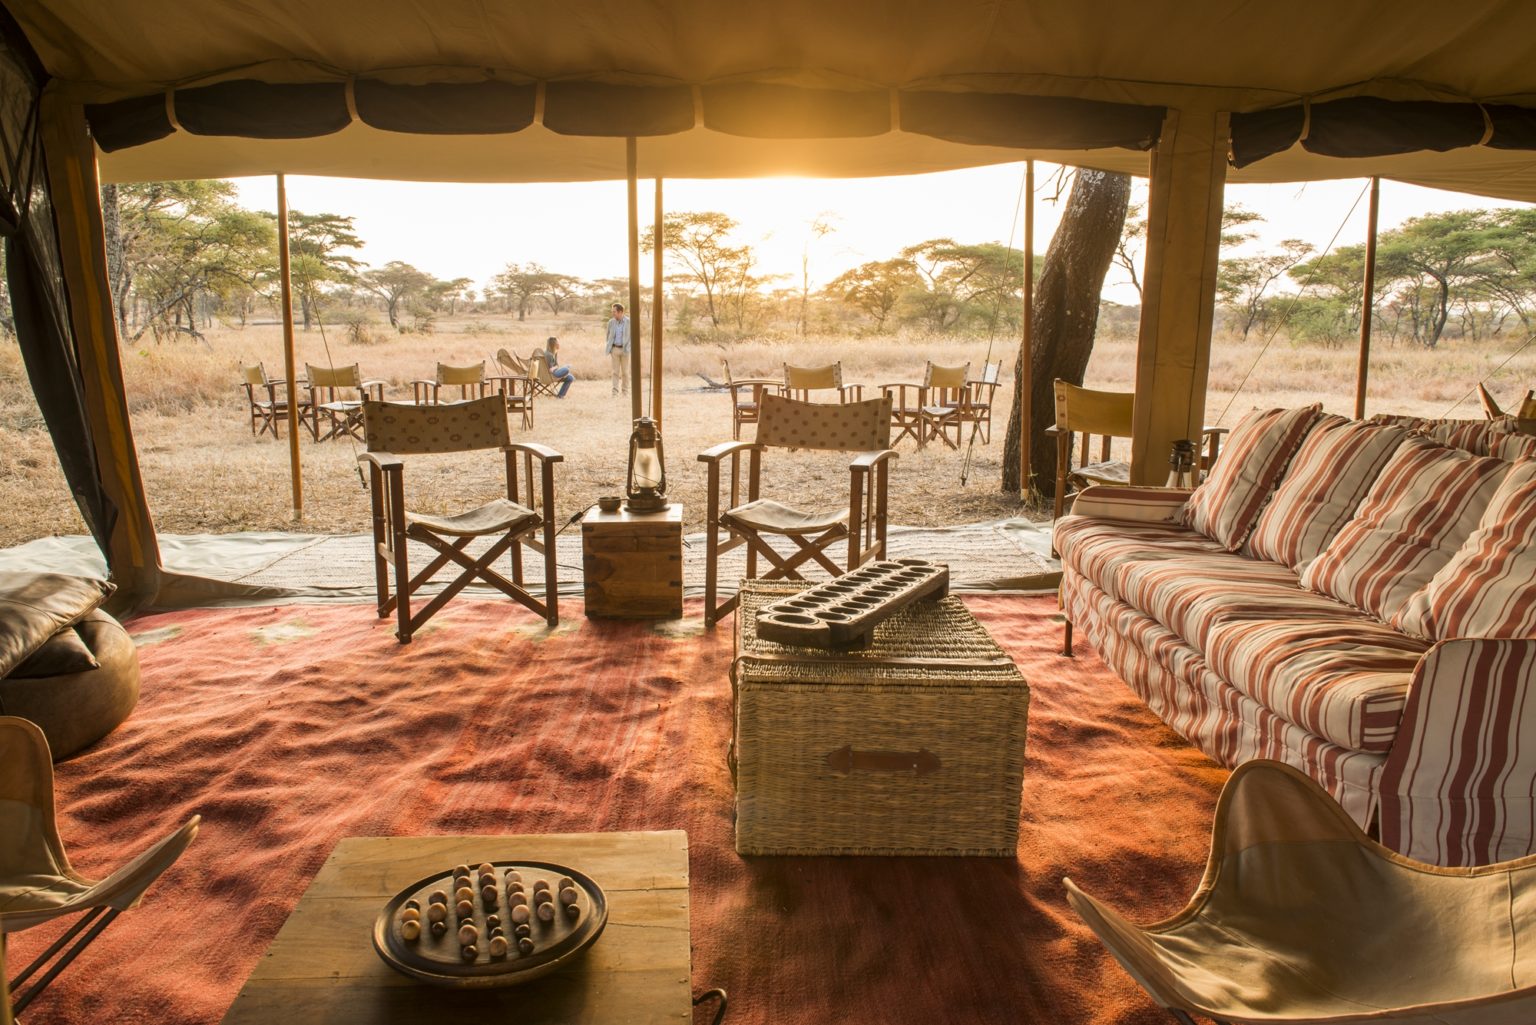 view from the inside of a tented safari camp at sunset